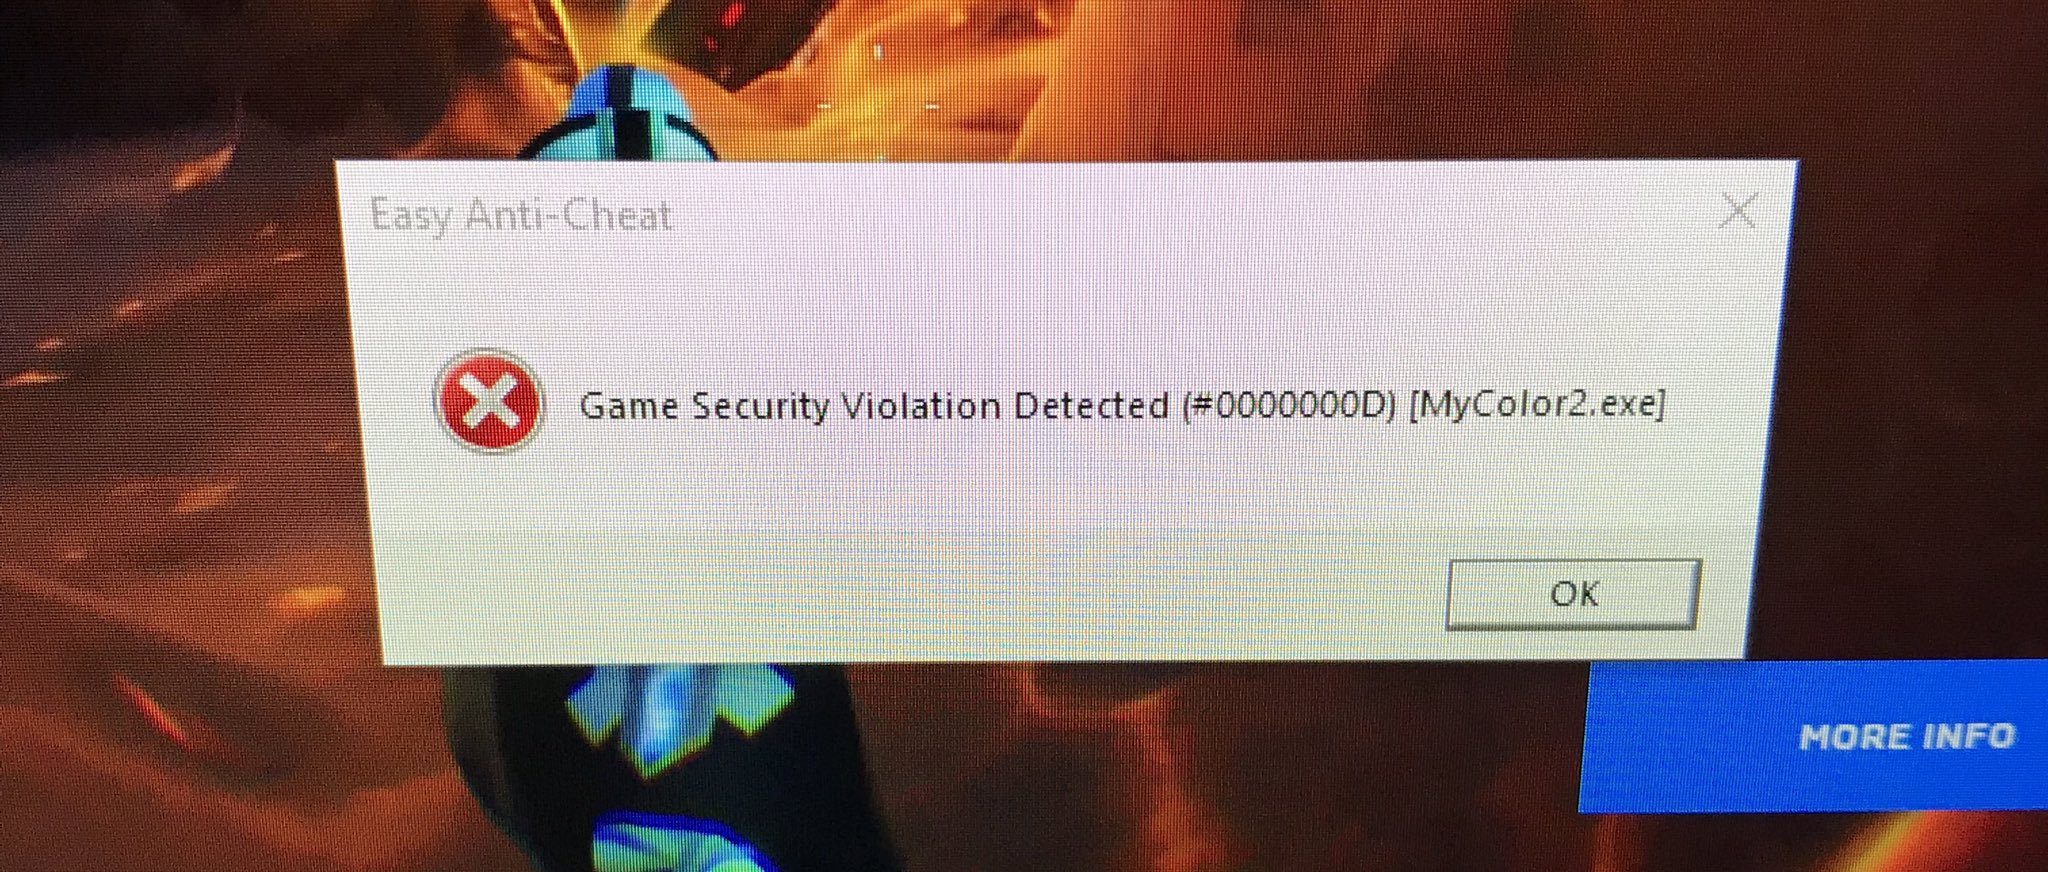 Easy Anti Cheat Violation Detected Fortnite Error Game Security Violation Detected 00000001 00000006 How To Fix Fortnite Battle Royale